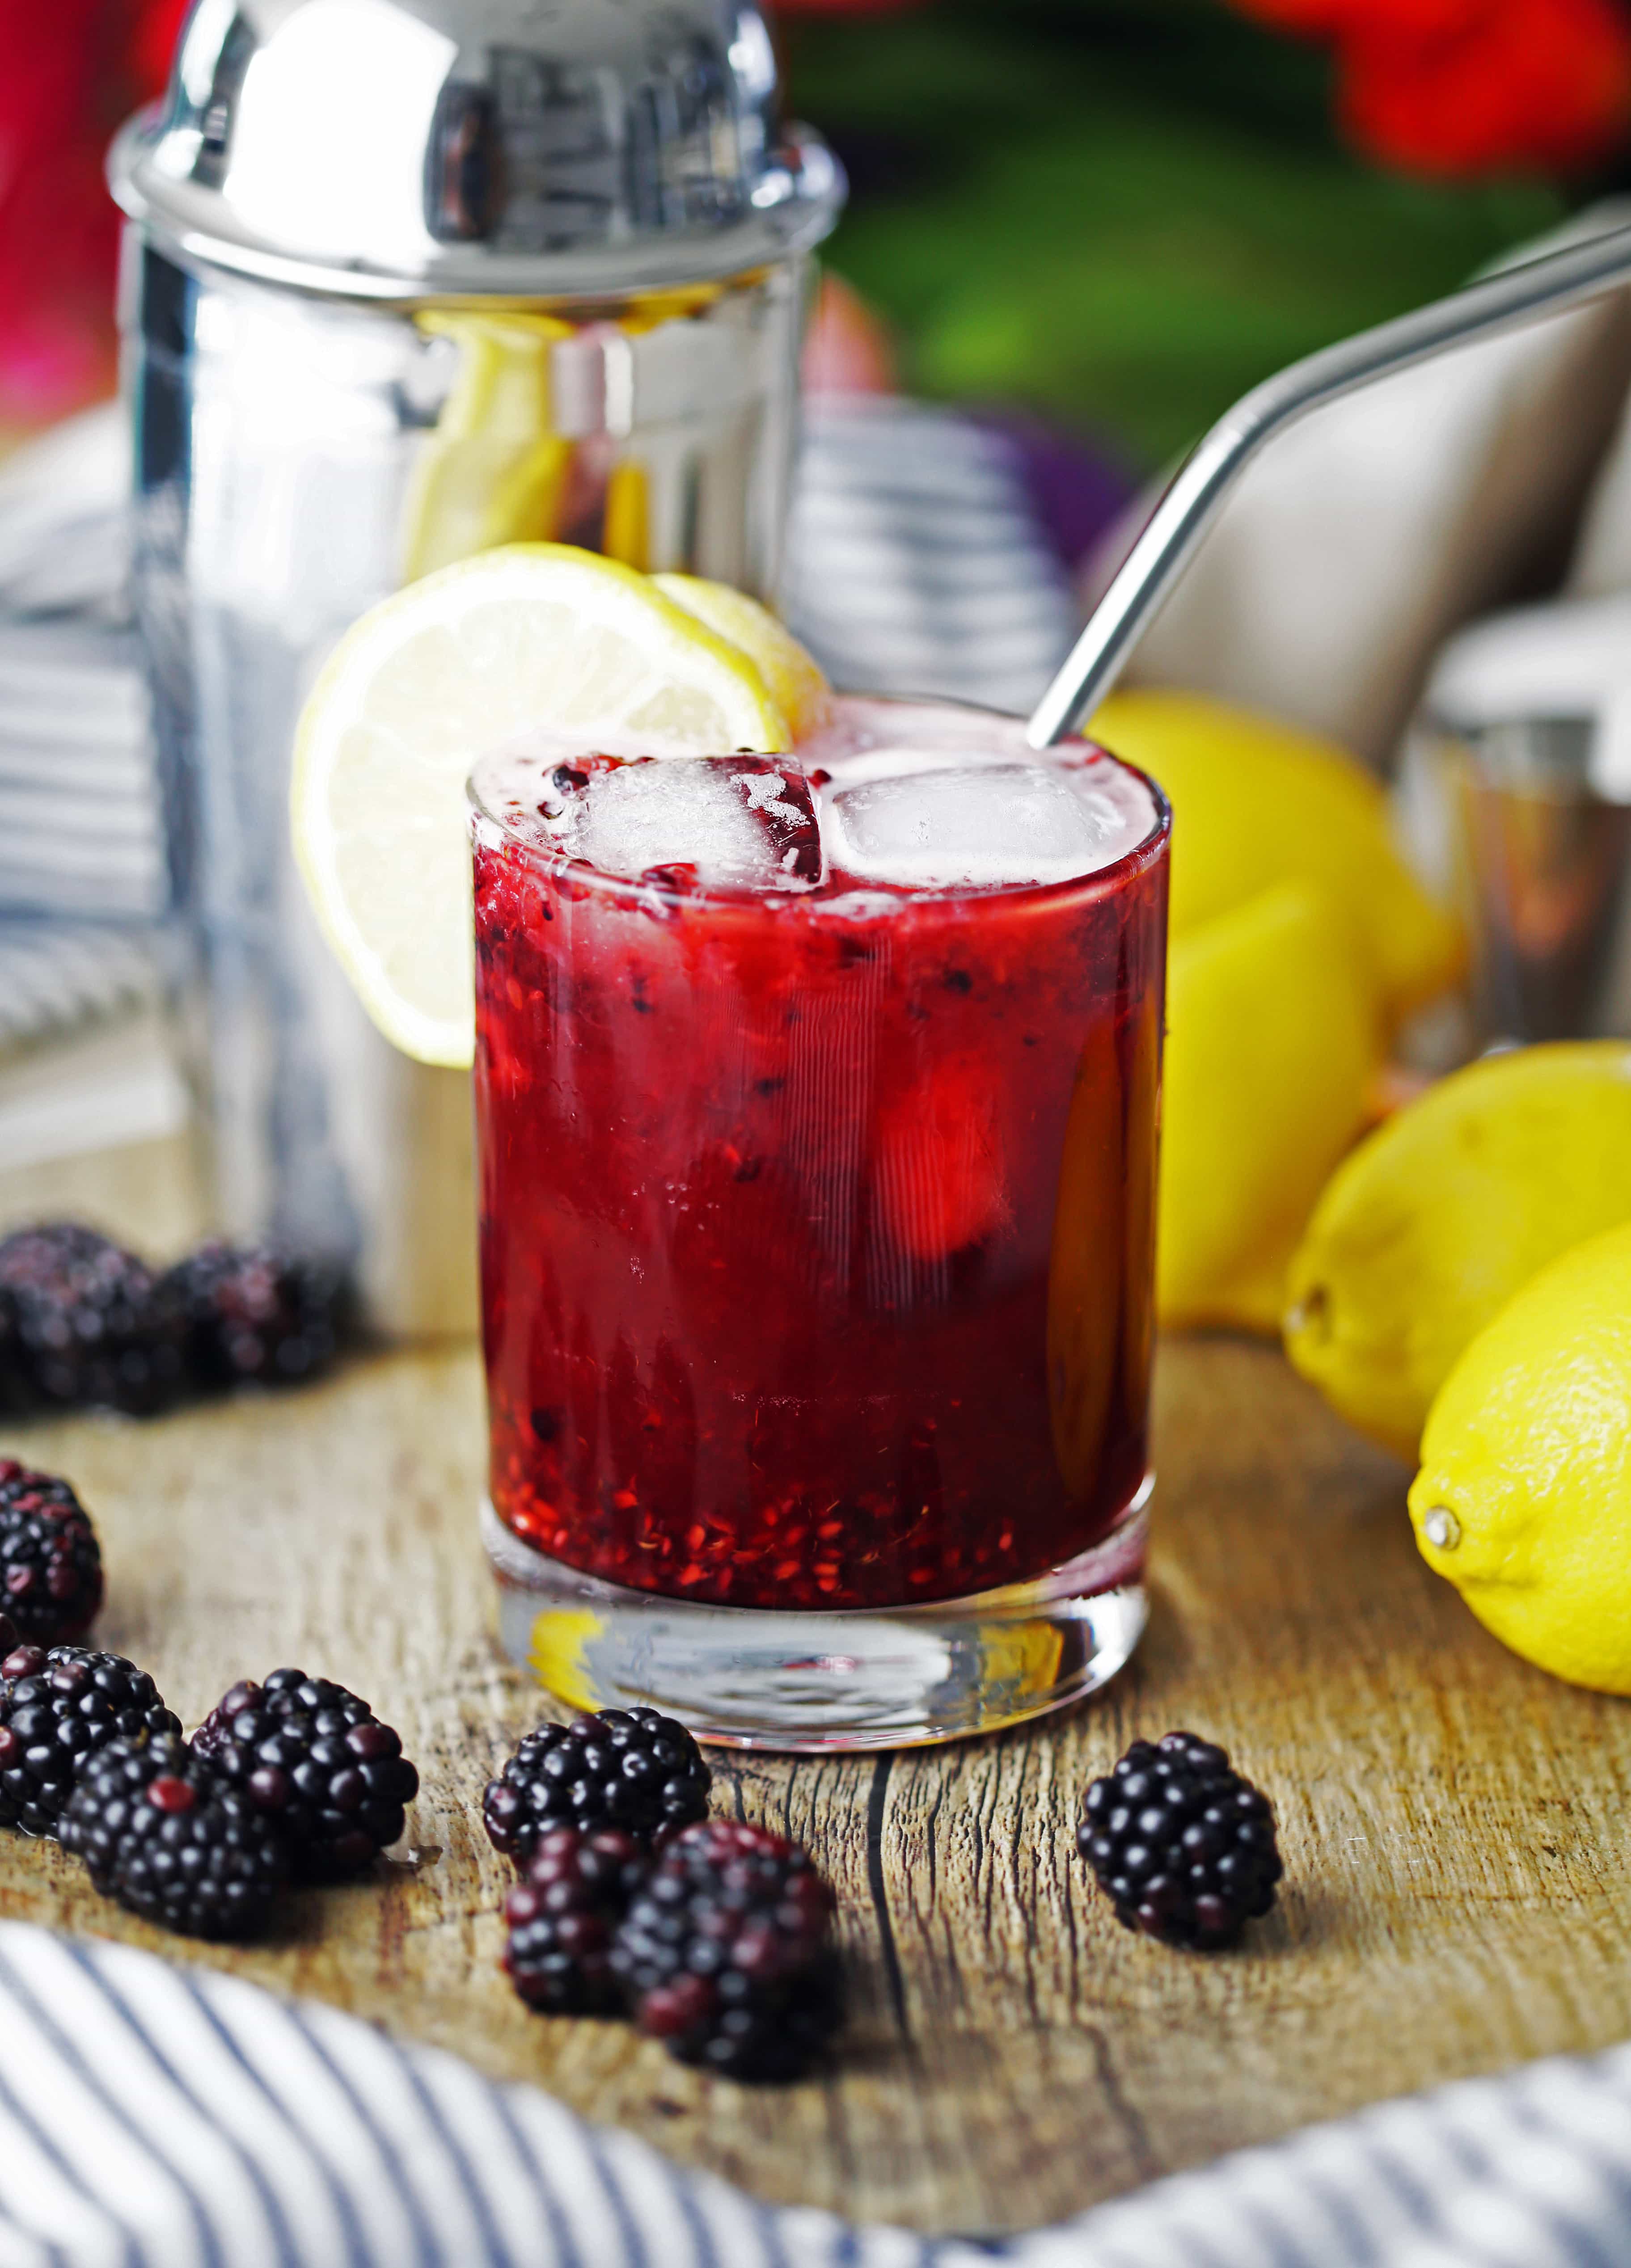 Blackberry lemon smash made with gin in a double old-fashioned glass with a lemon slice.